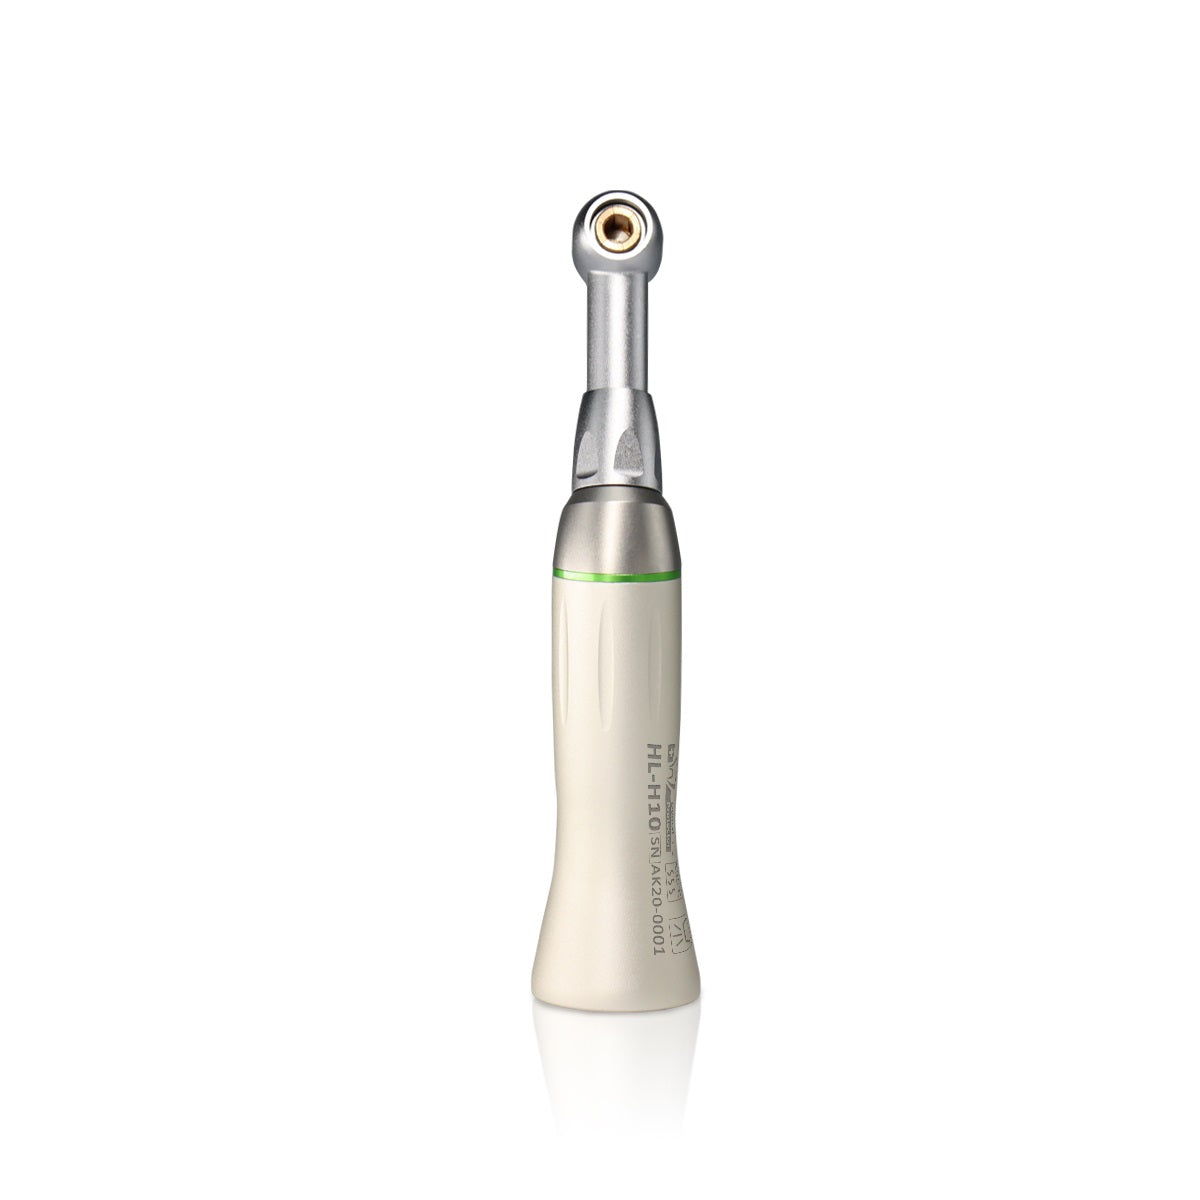 Dental 10:1 Contra Angle HL-H10 Low Speed Handpiece Push Dental Handpiece Air Turbine Hand Use File